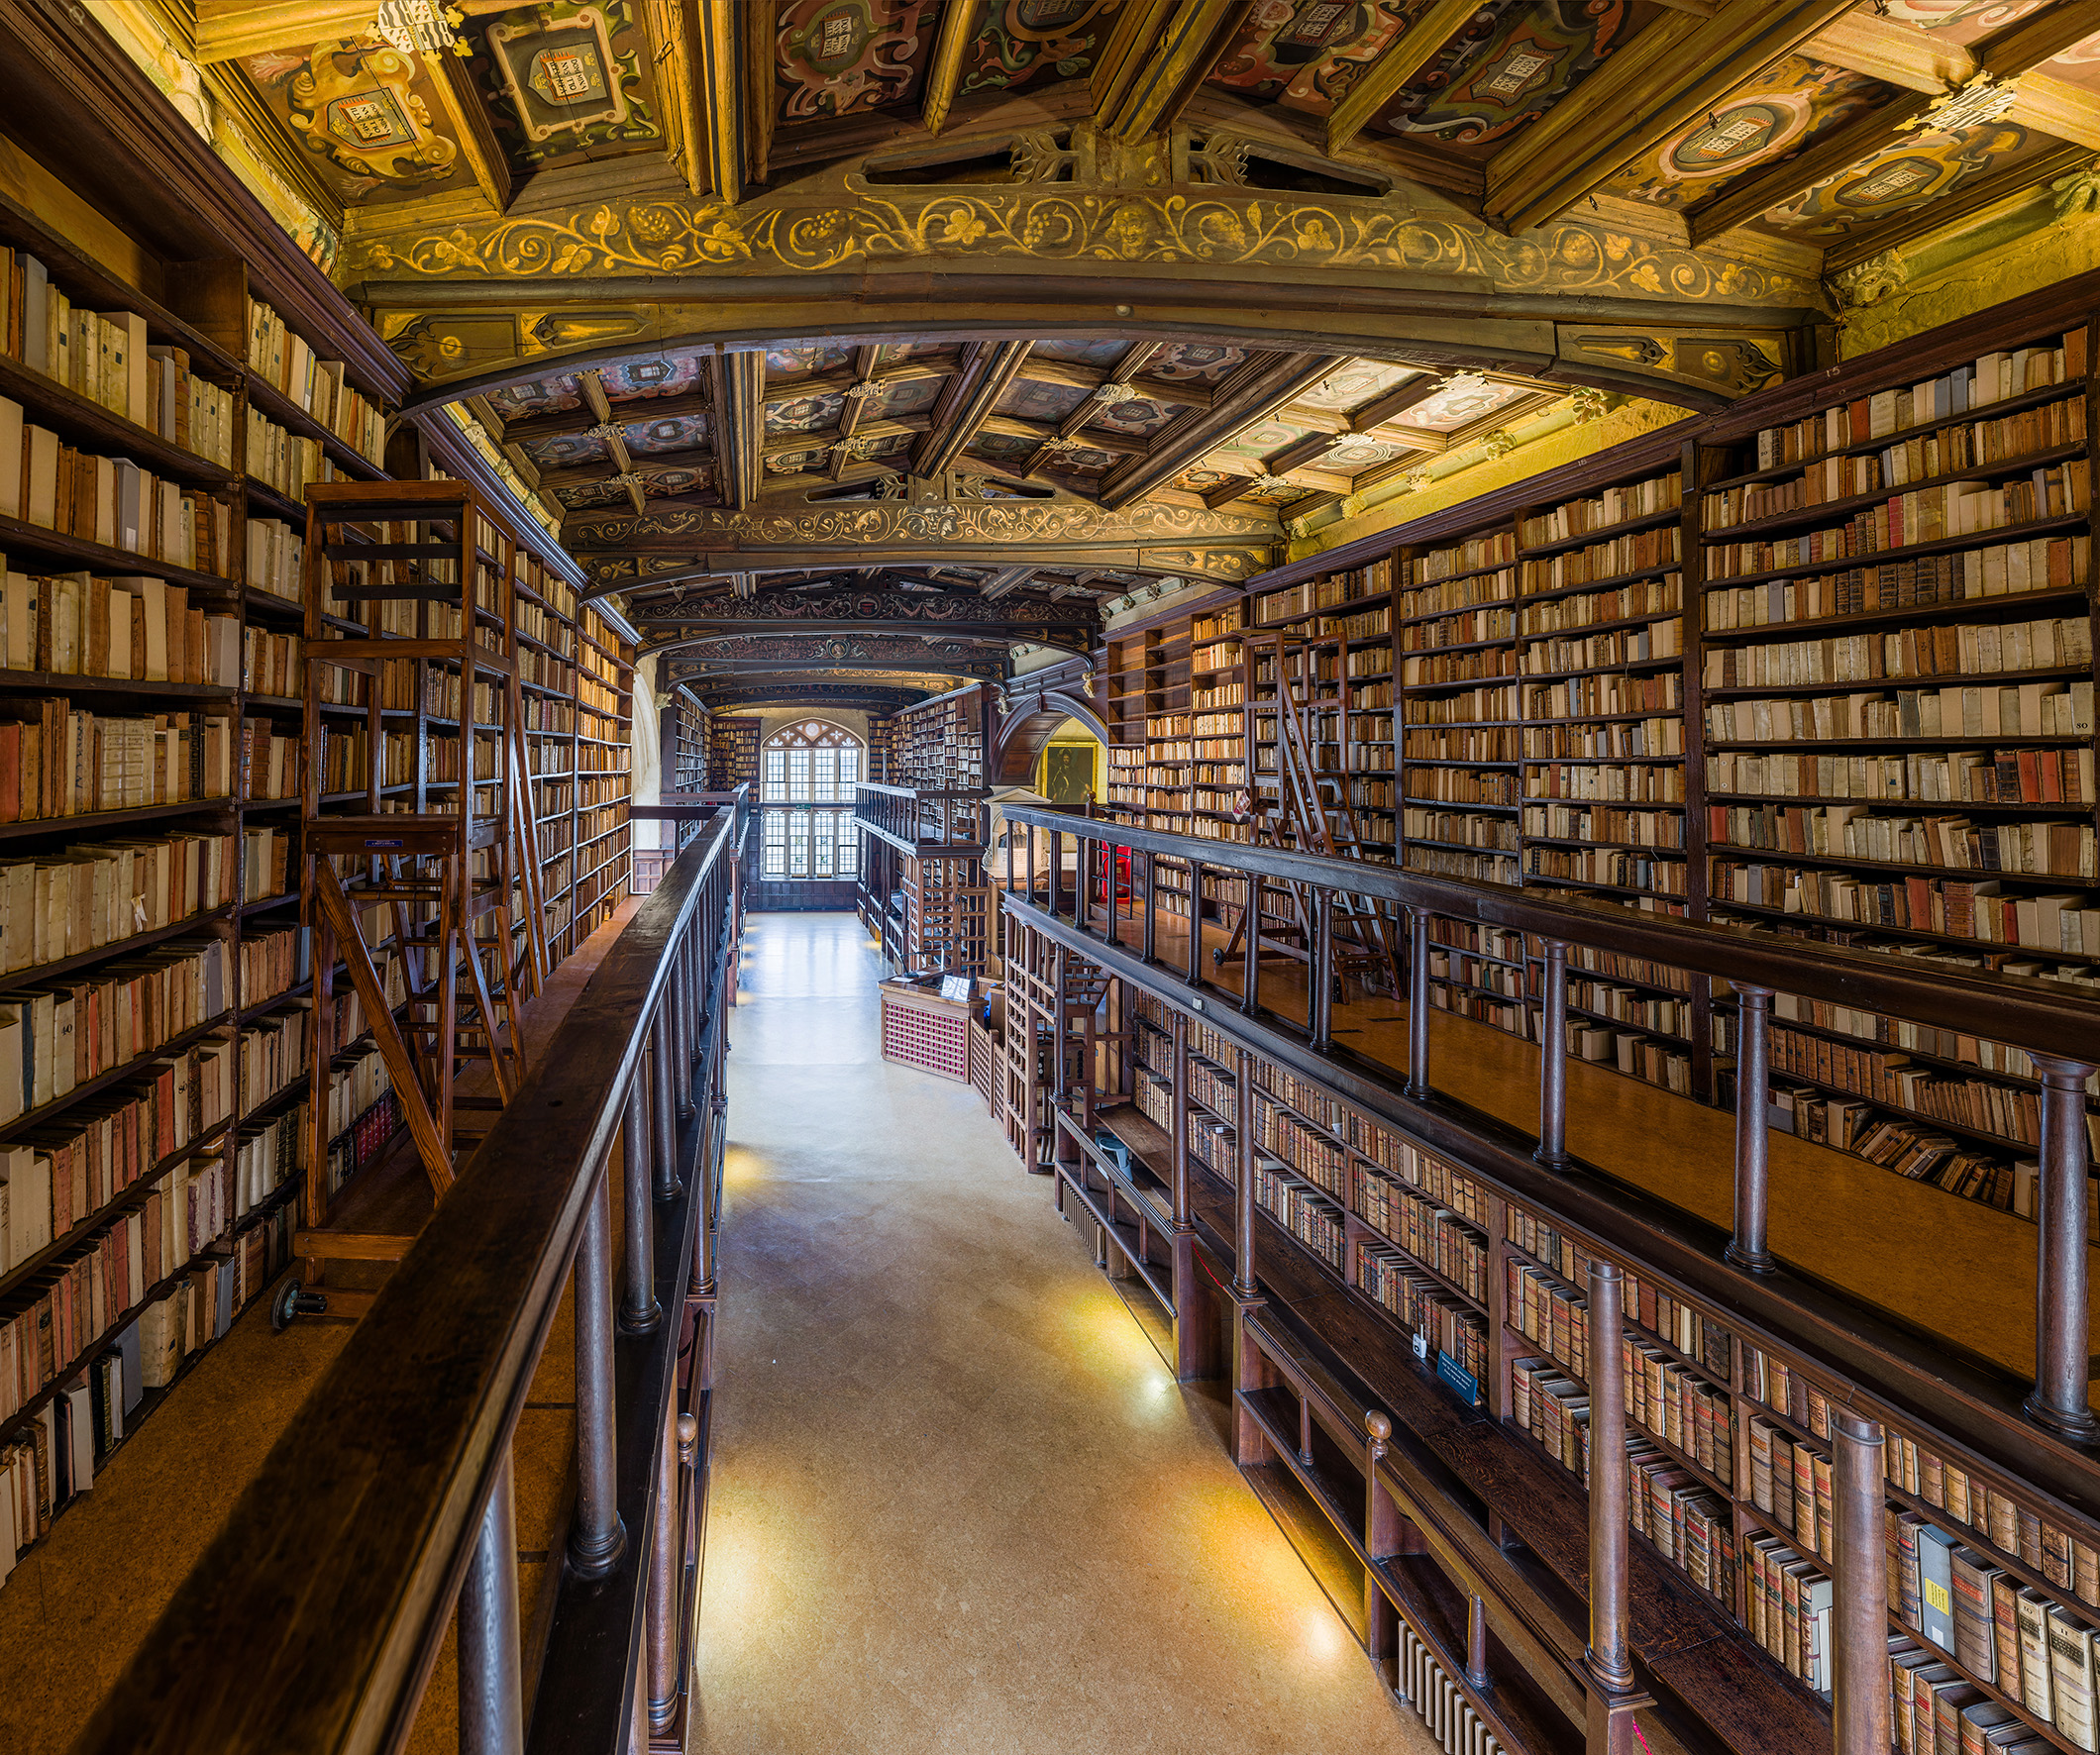 The Bodleian Library of Oxford University, Britain's second biggest library, is hosting Babel: Adventures in Translation